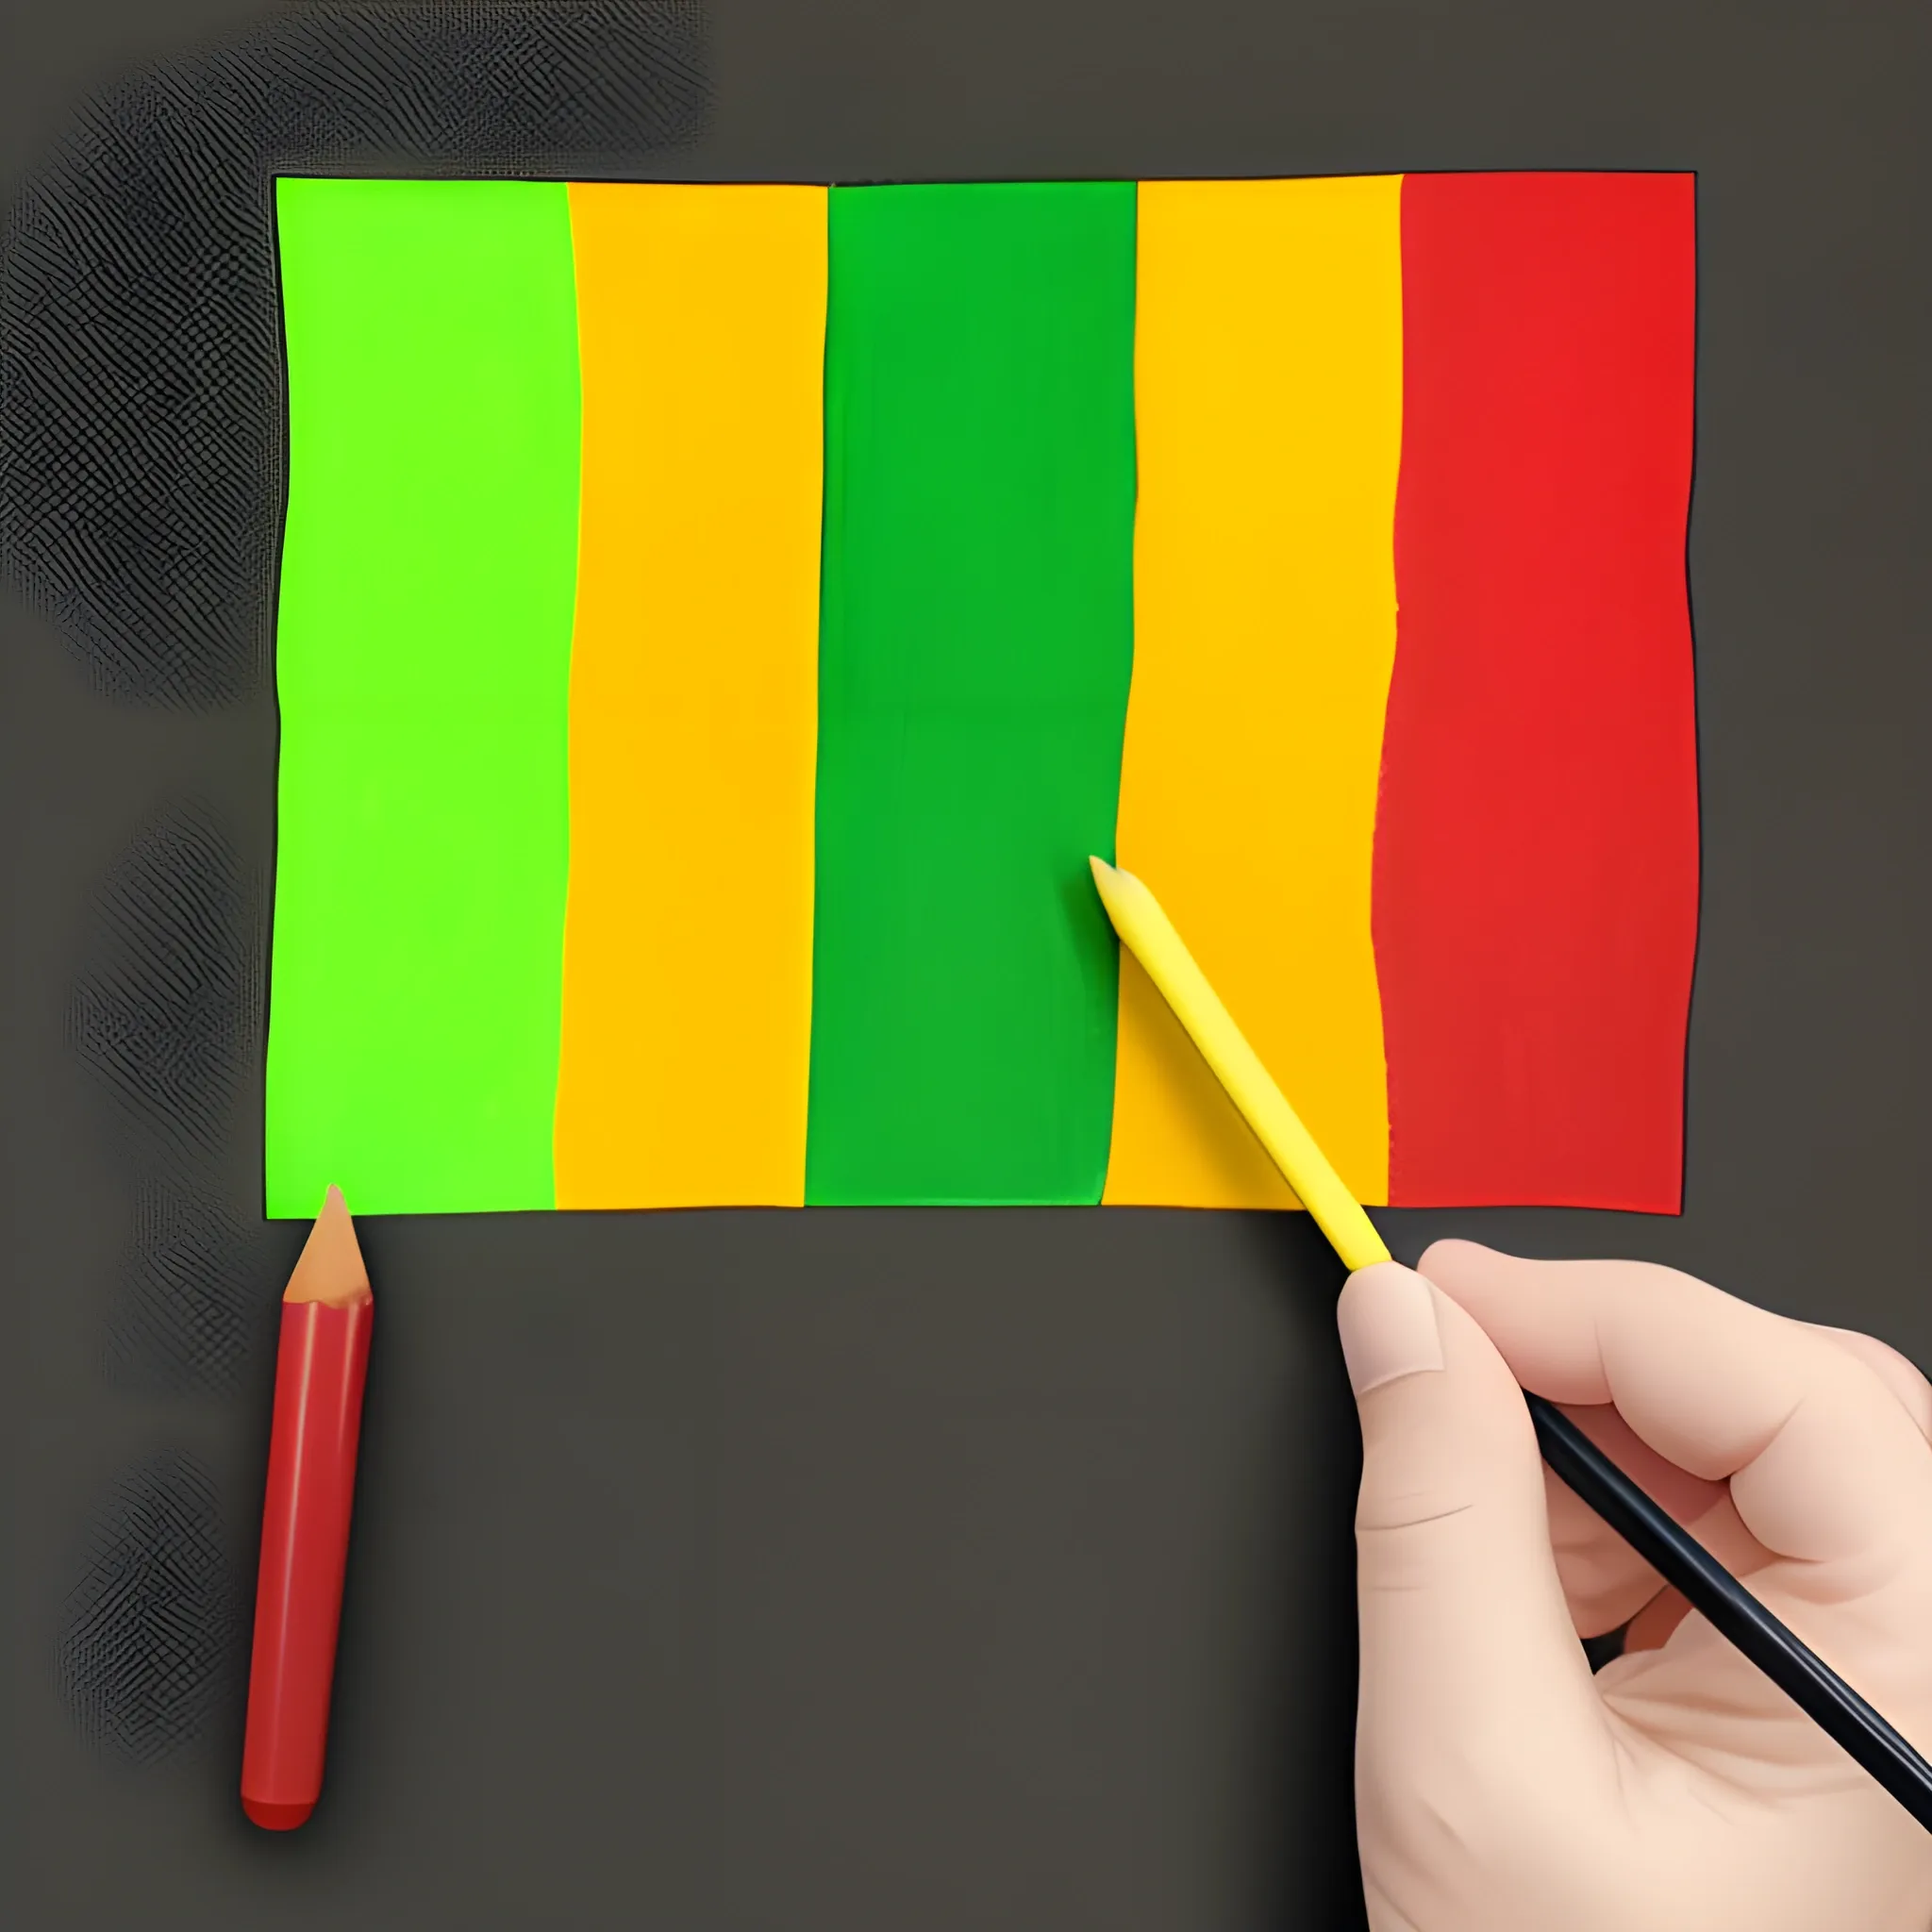 Draw a flag with 3 colors, first red, second yellow and third dark green